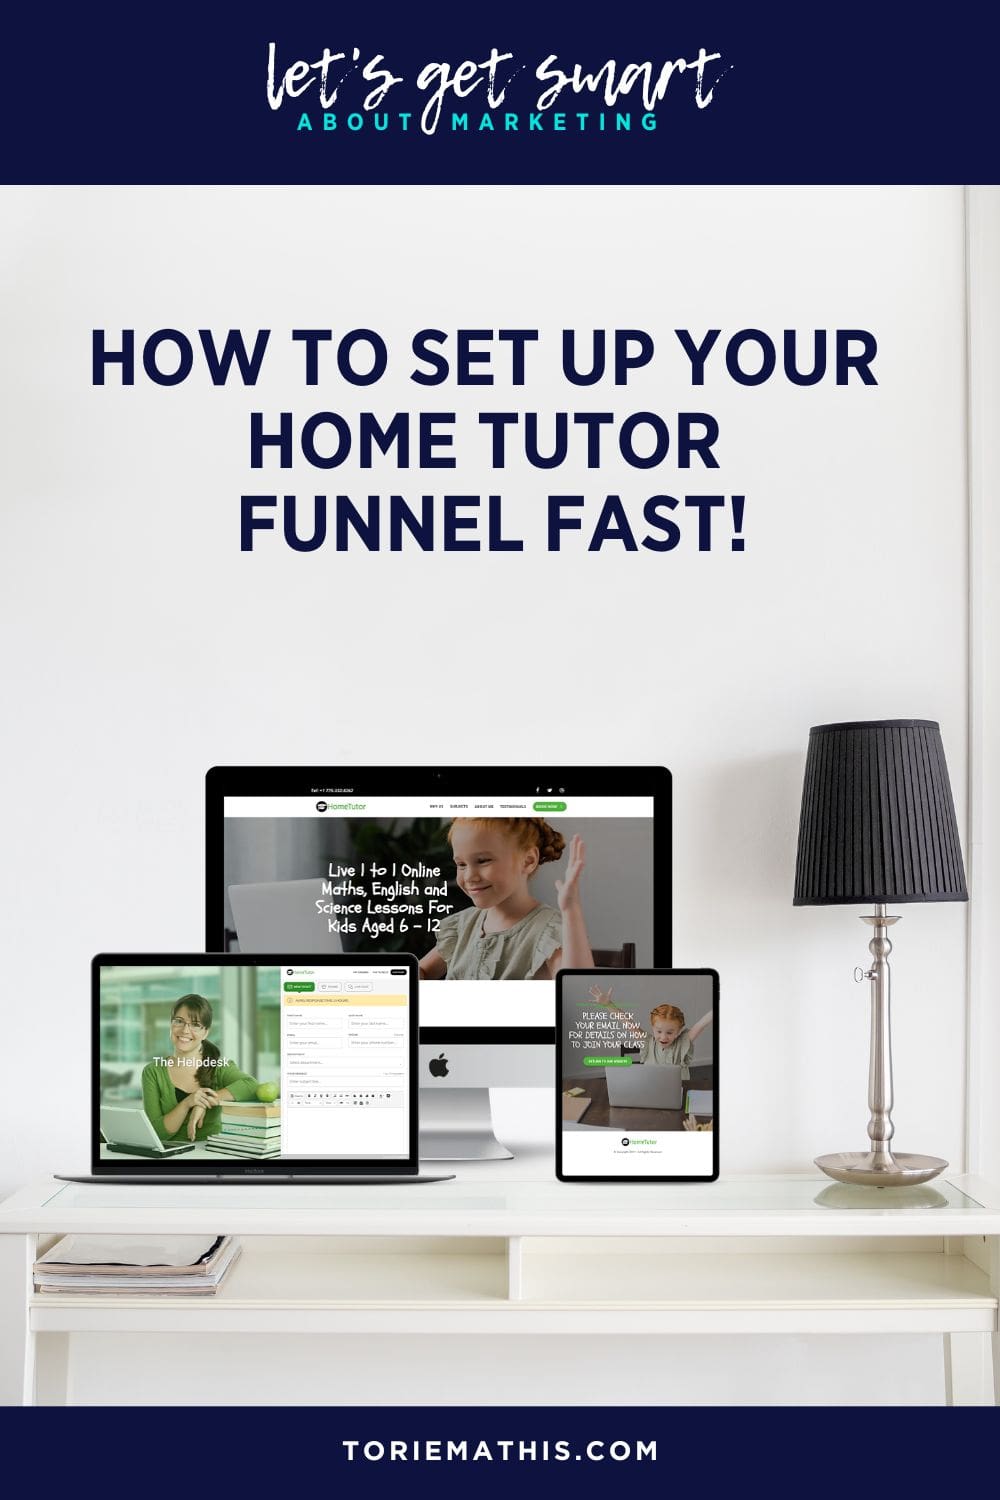 Home Tutor Funnel Template